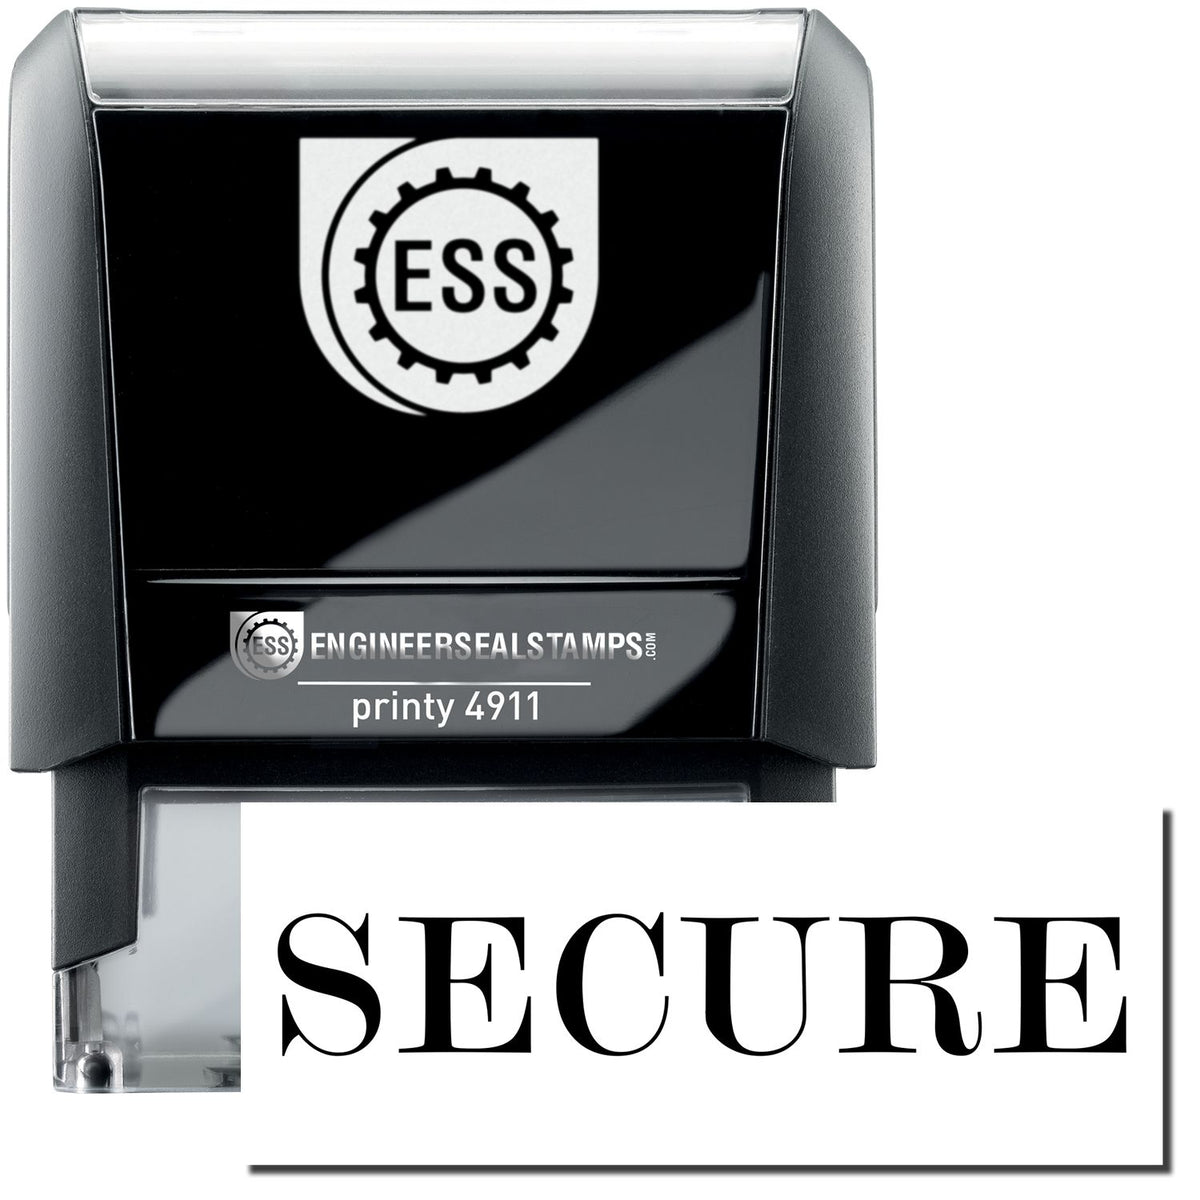 A self-inking stamp with a stamped image showing how the text &quot;SECURE&quot; is displayed after stamping.